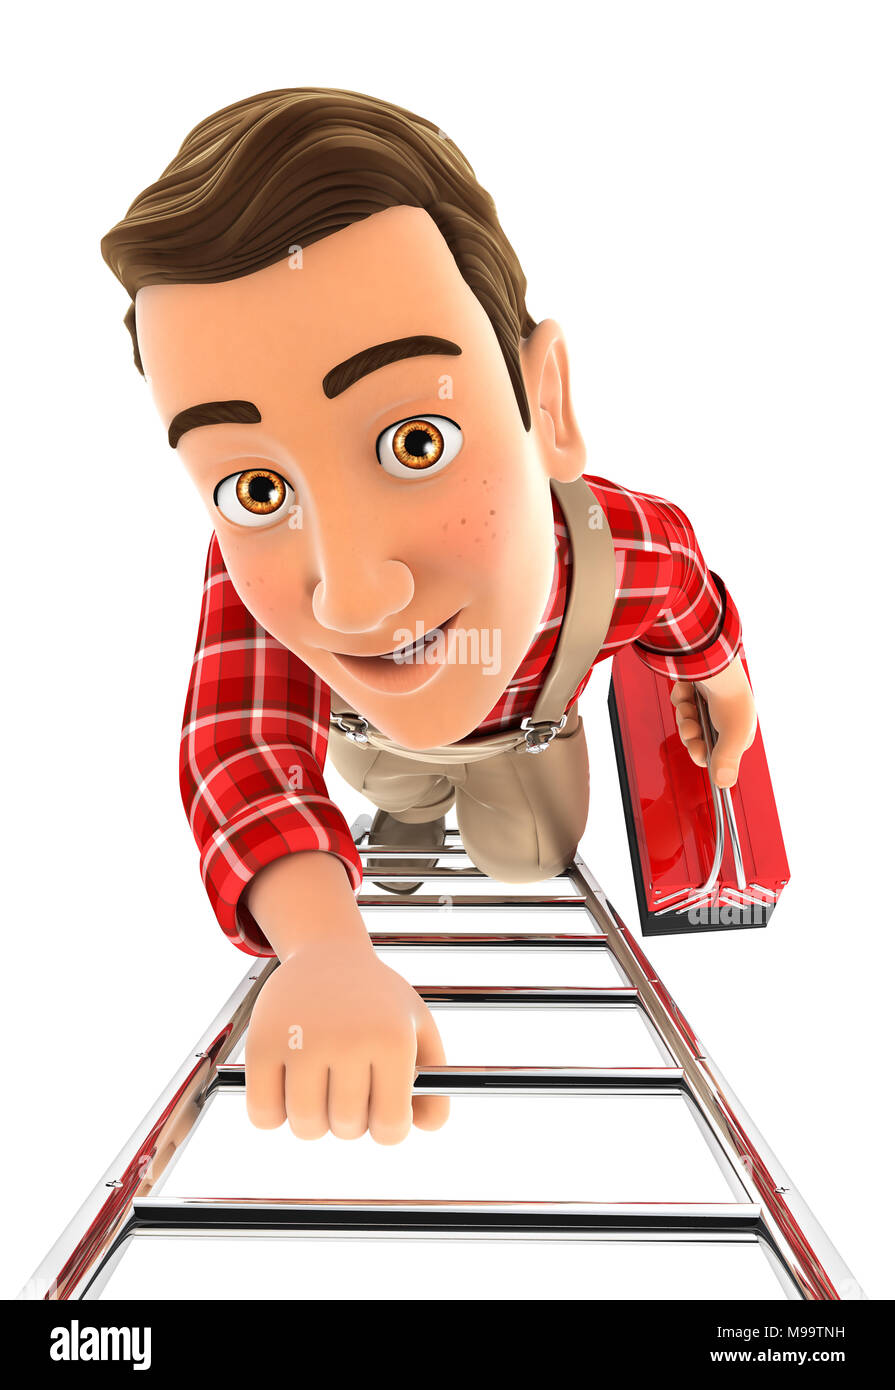 Cartoon illustration man climbing ladder Cut Out Stock Images & Pictures -  Alamy